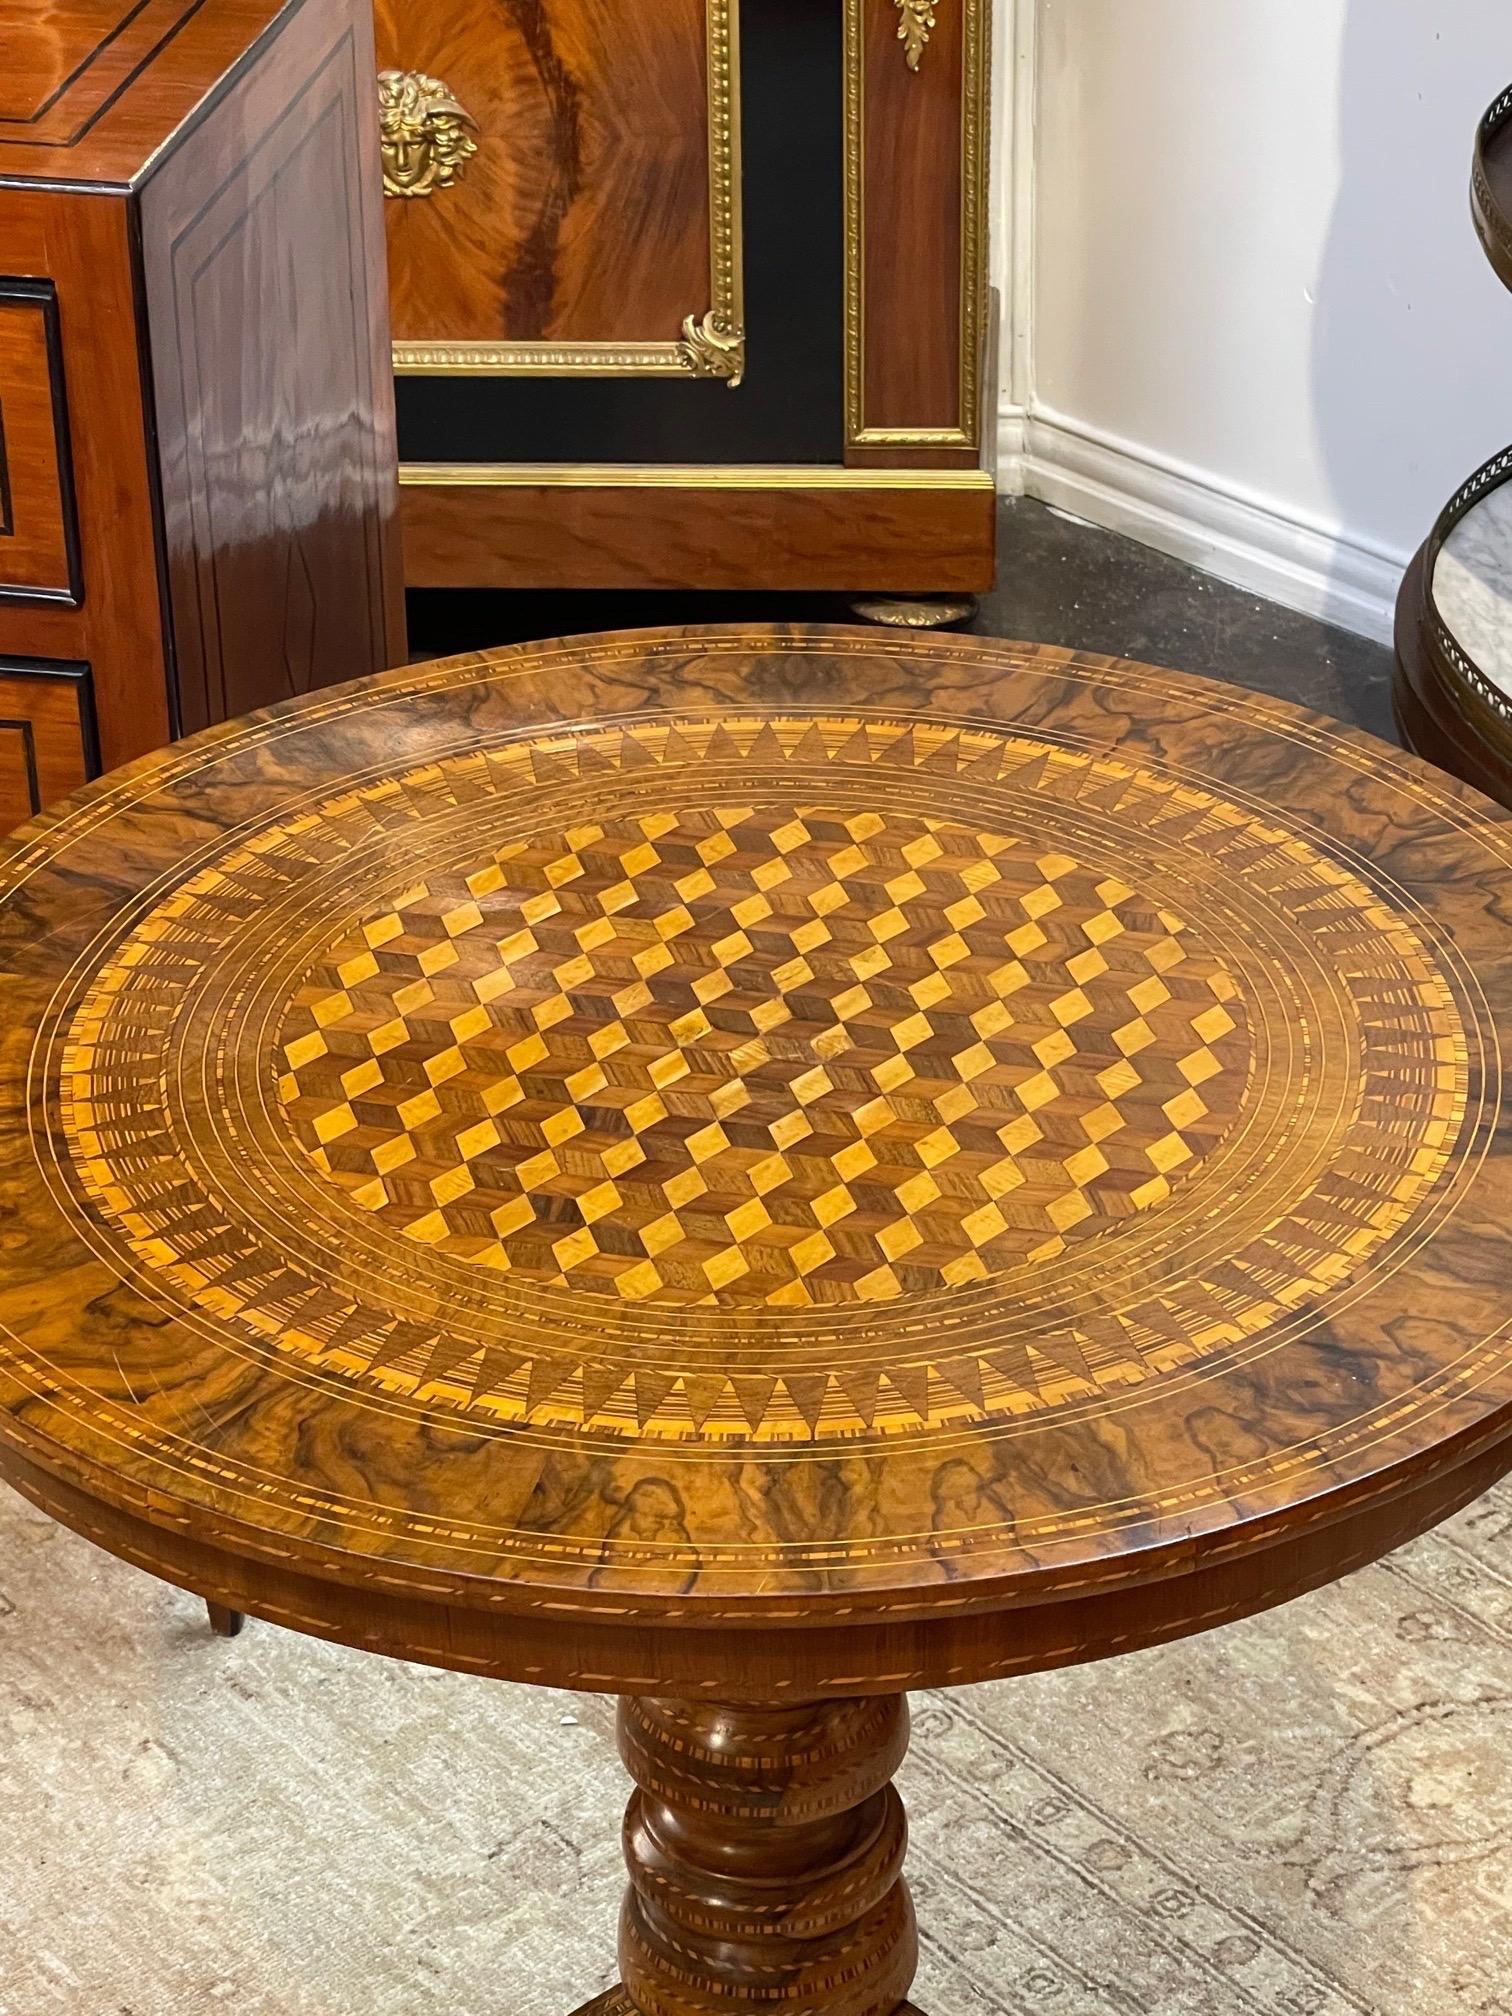 Very nice 19th century Northern Italian parquetry inlaid walnut side table. Beautiful decorative pattern on the top. Fabulous!